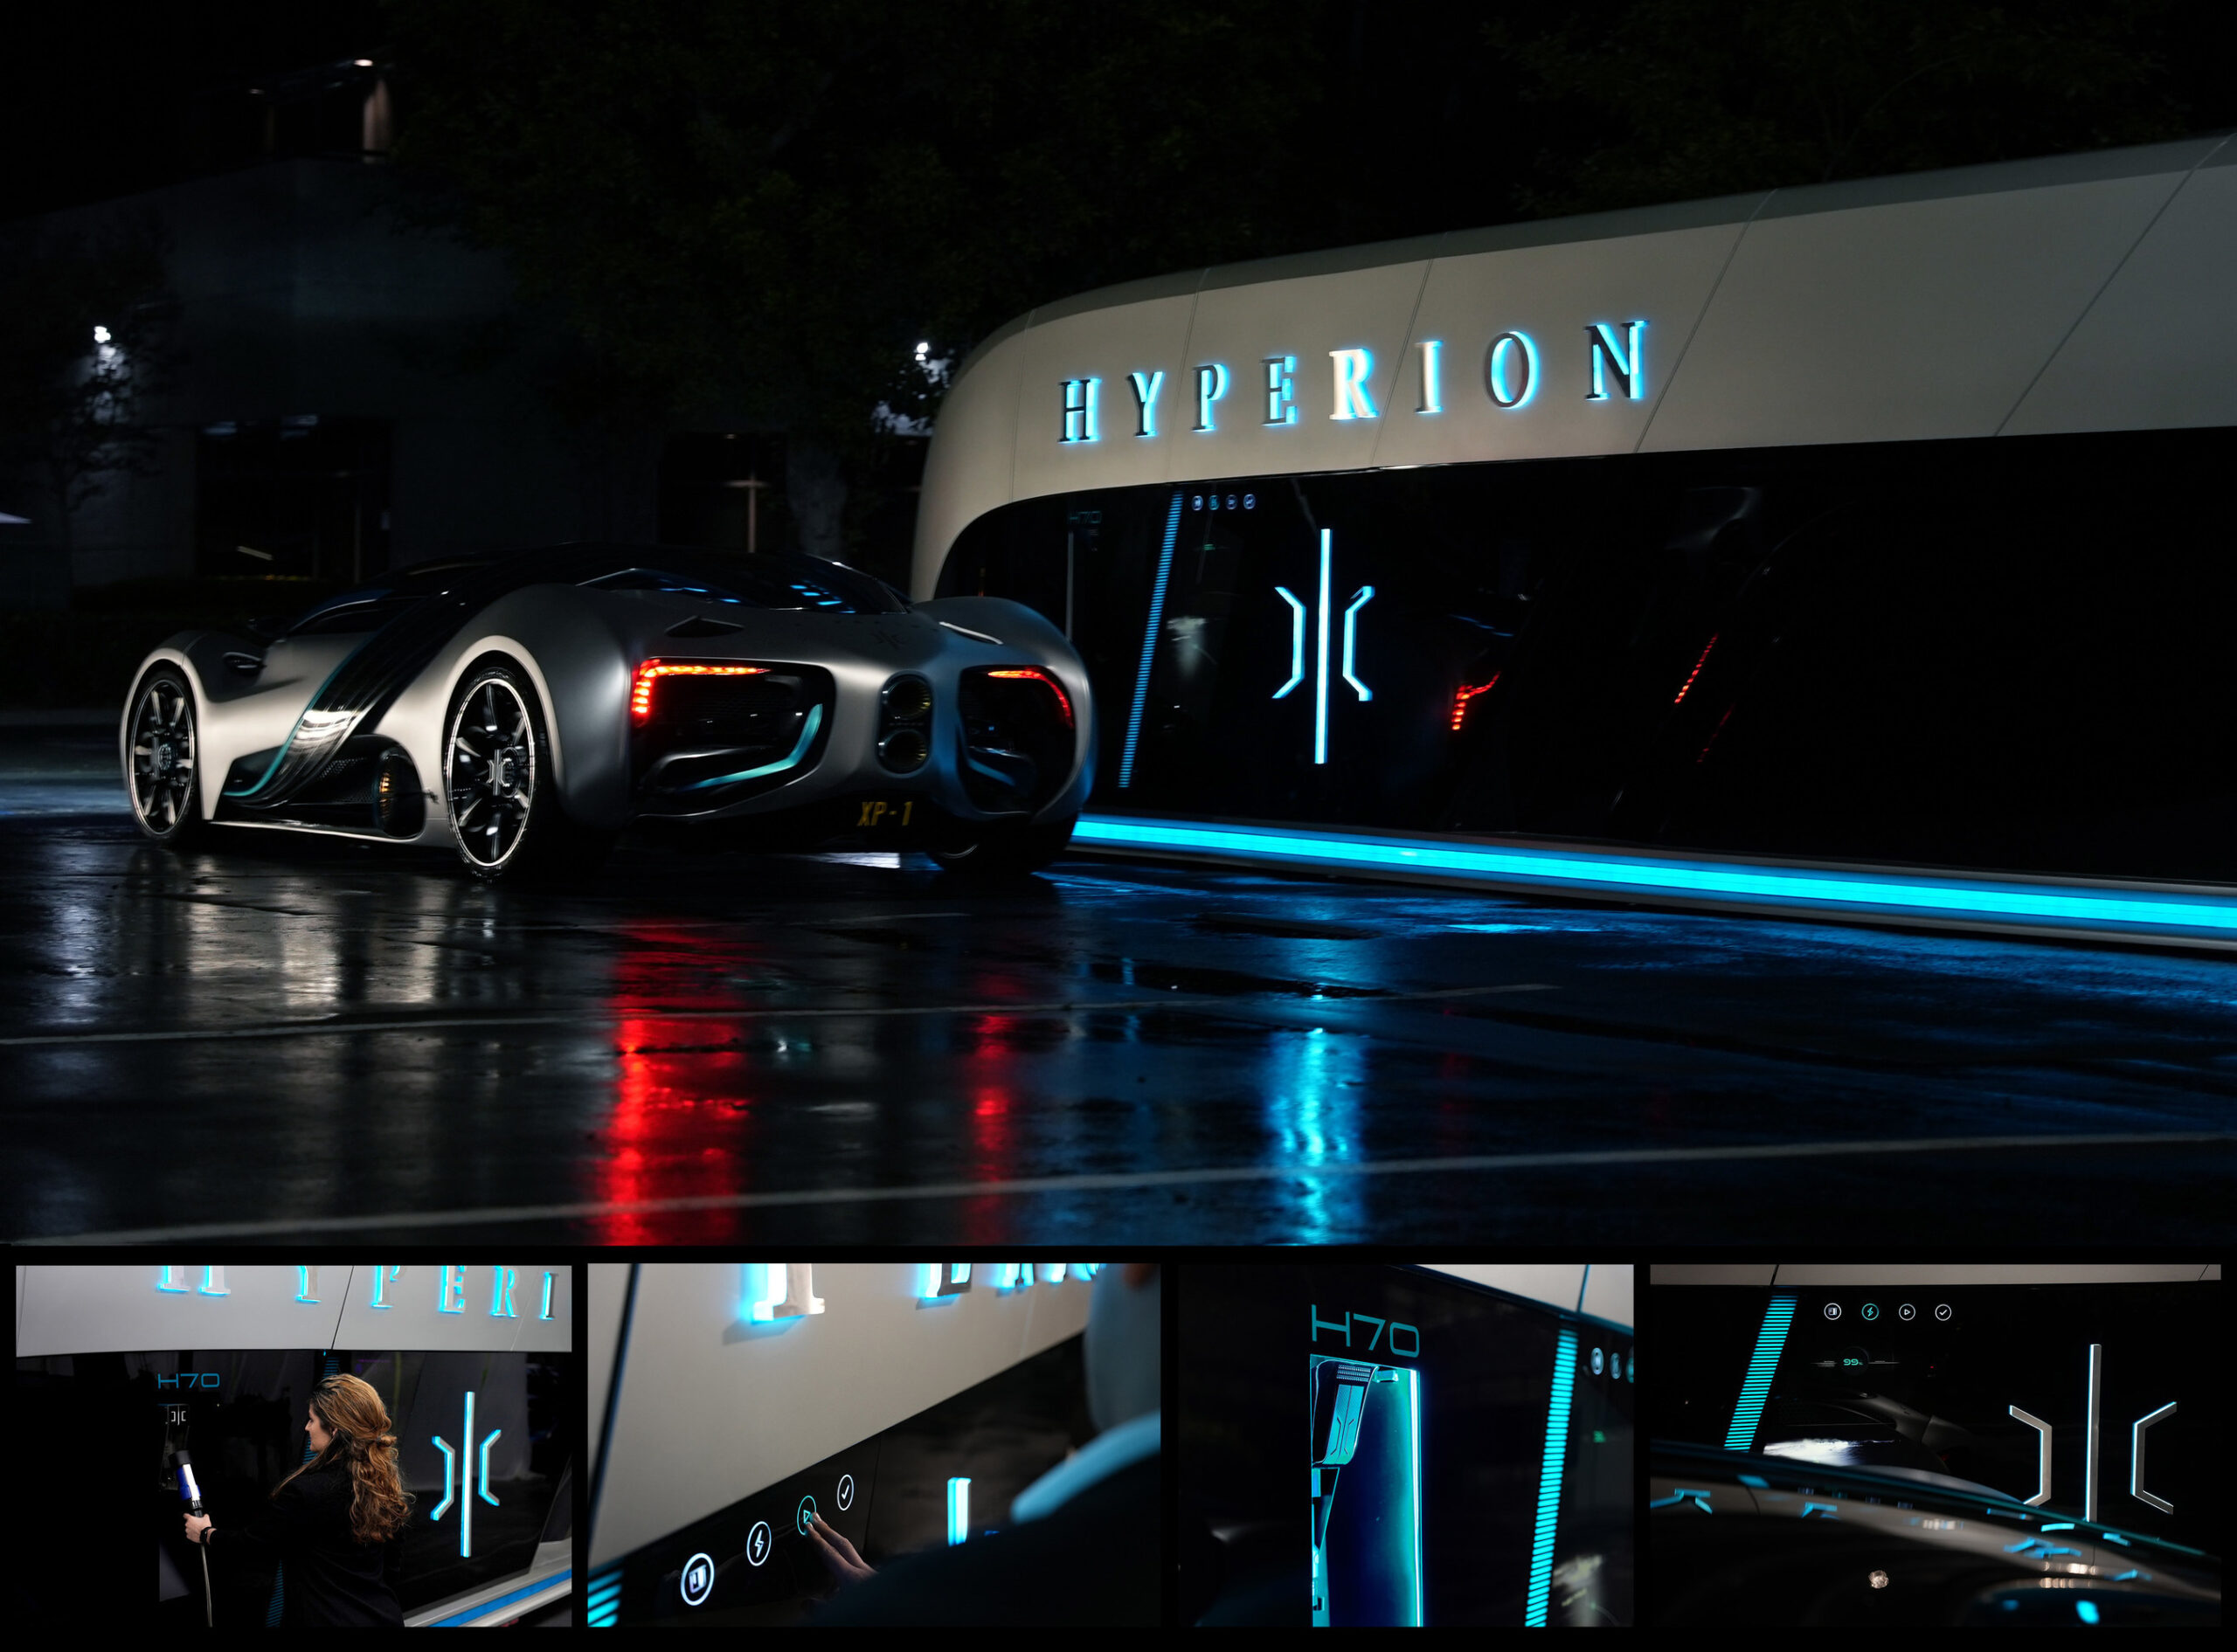 Hyperion fuel station